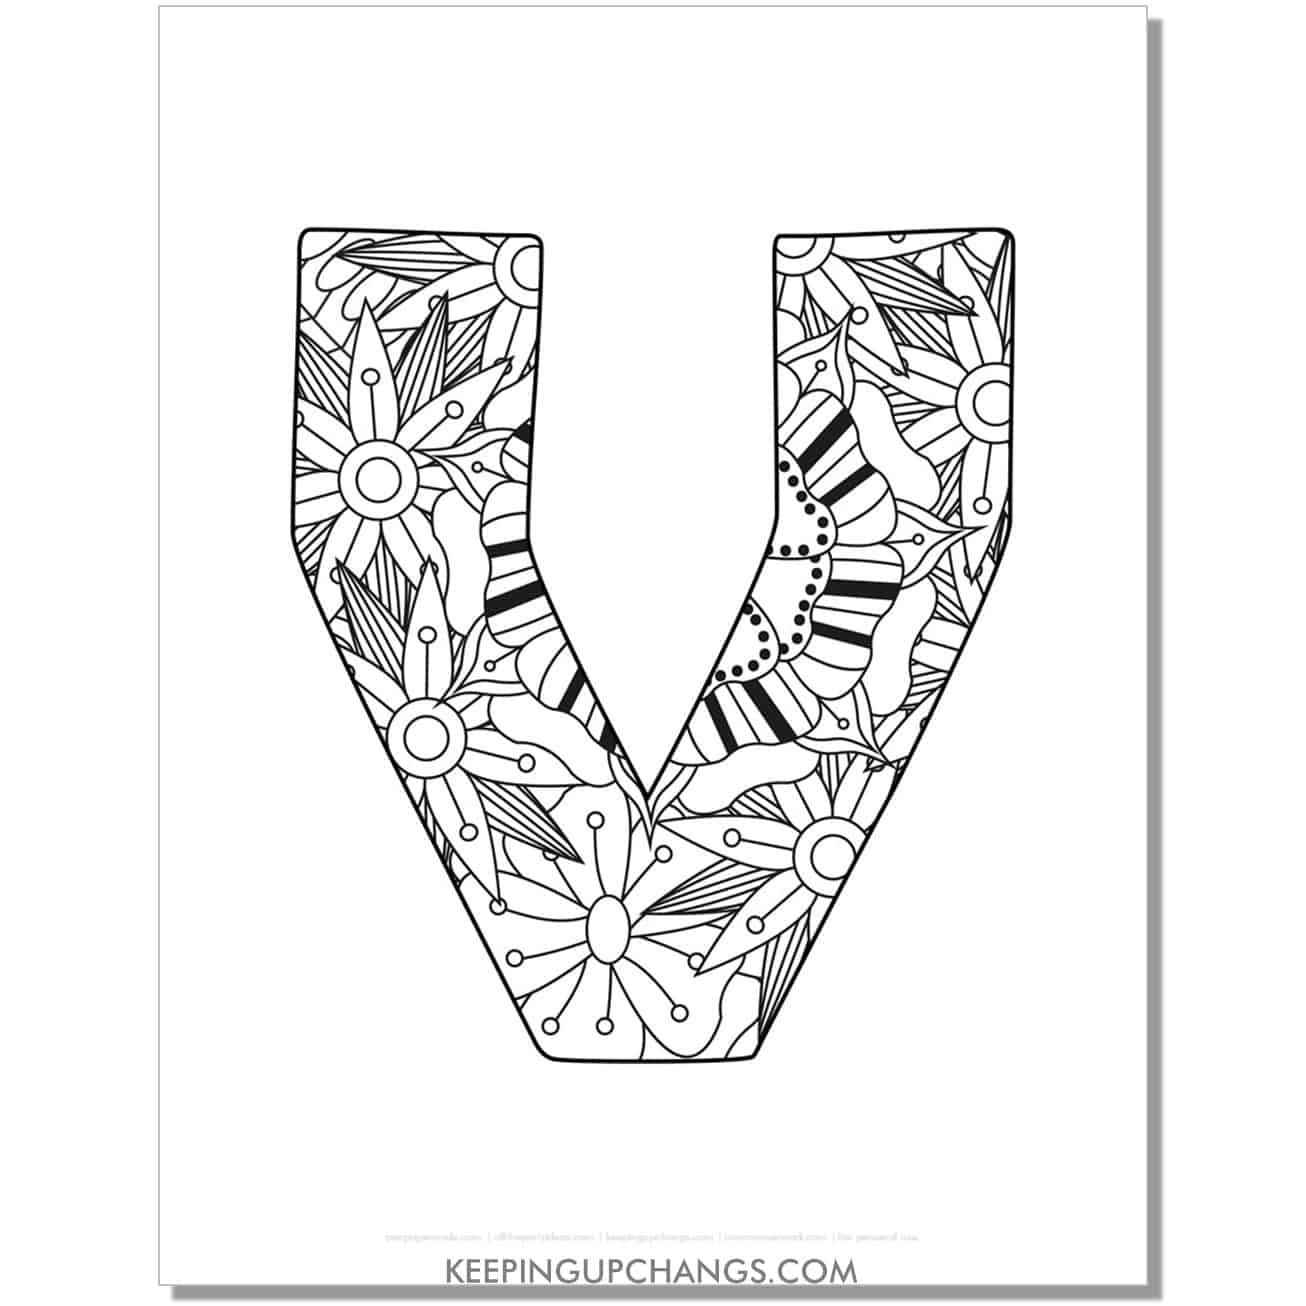 free letter v to color, complex mandala zentangle for adults.